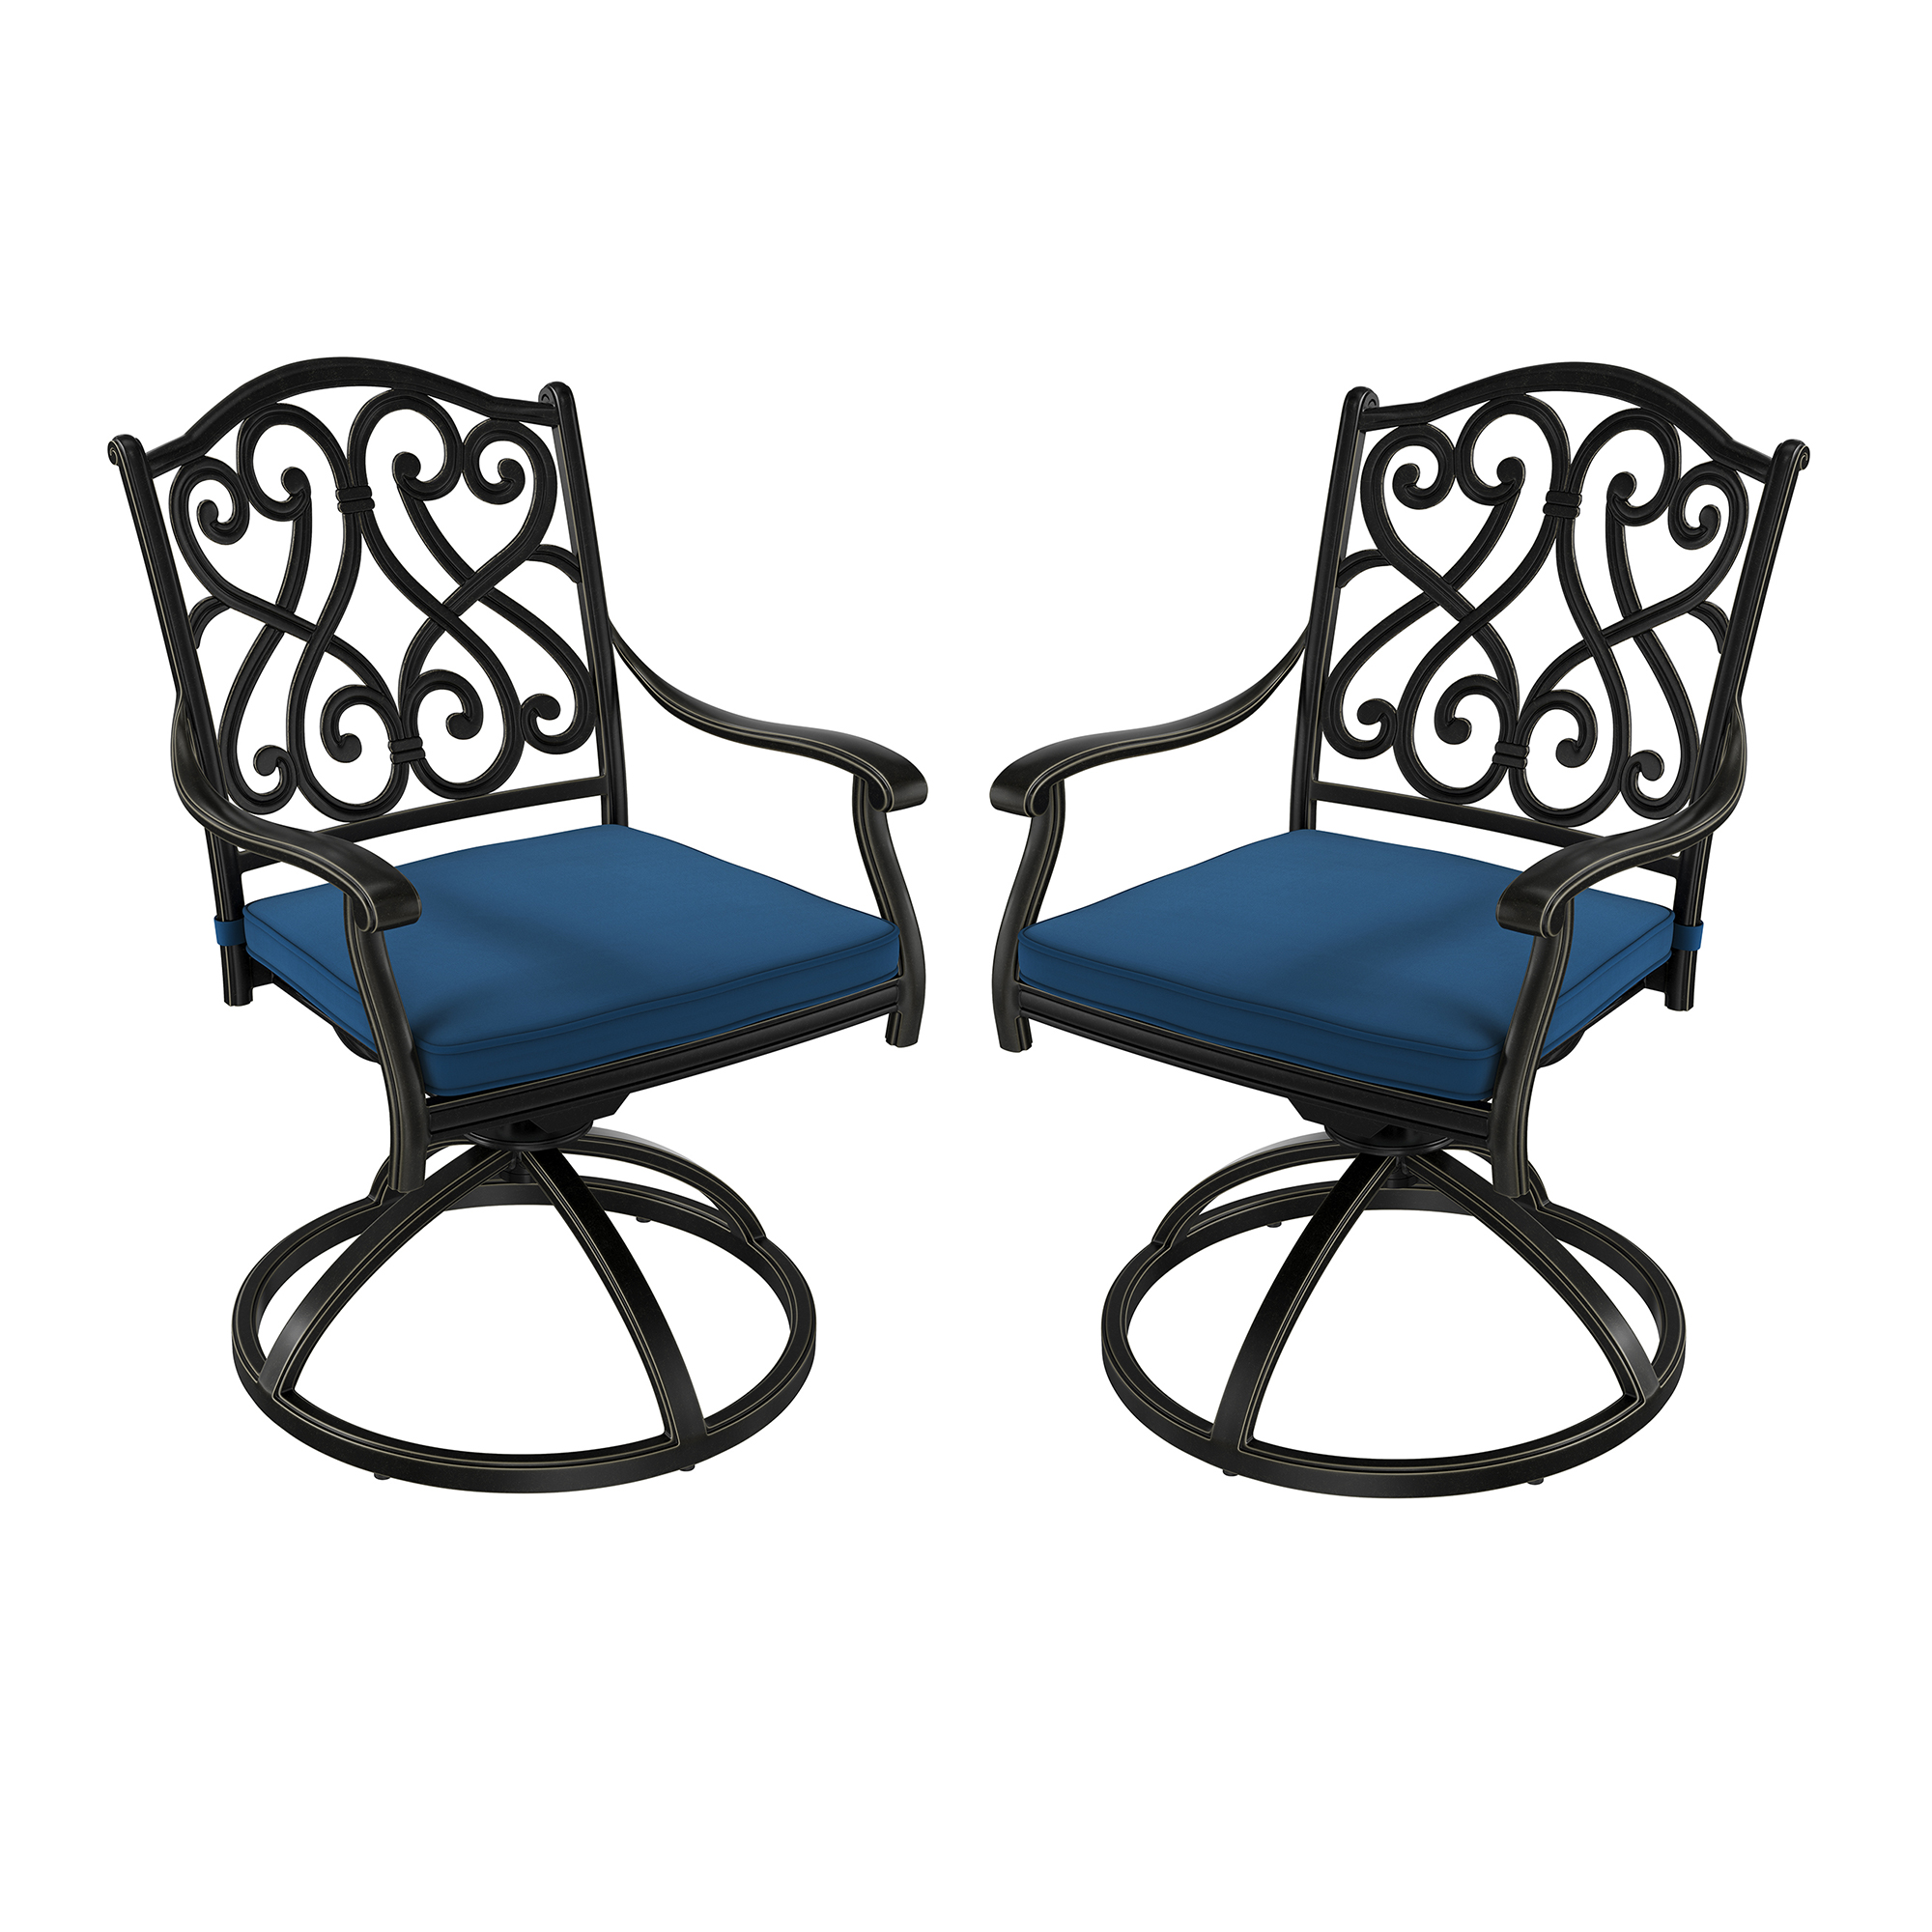 2-Piece Cast Aluminum Patio Dining Chair Set with Thick Olefin Cushions and 360° Swivel Rockers